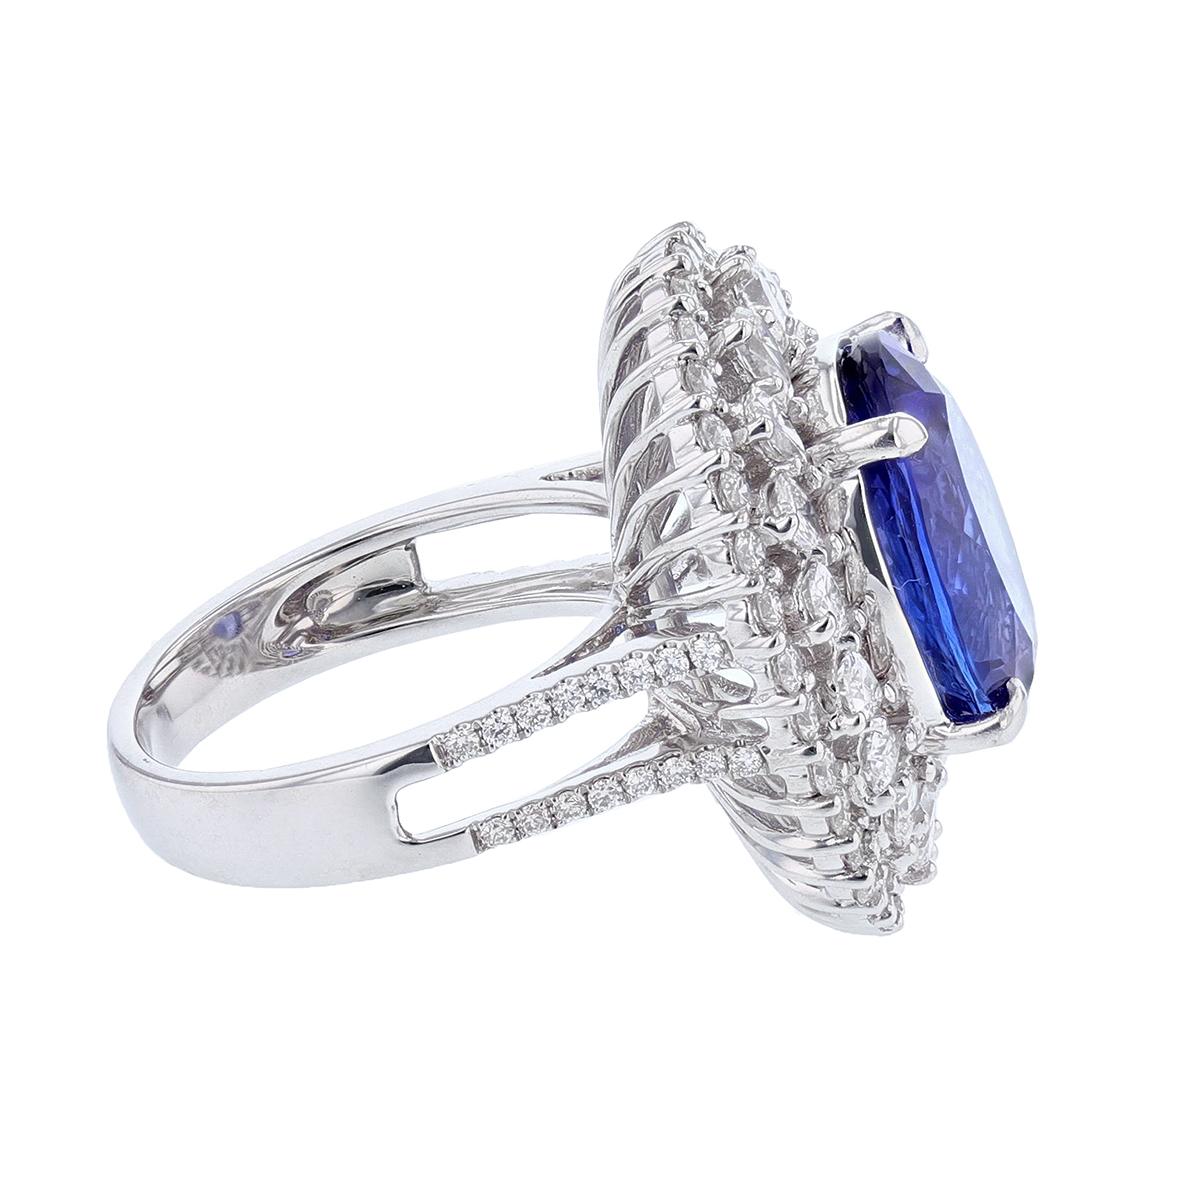 Oval Cut 18 Karat White Gold 6.53 Carat Oval Tanzanite and Diamond Ring For Sale